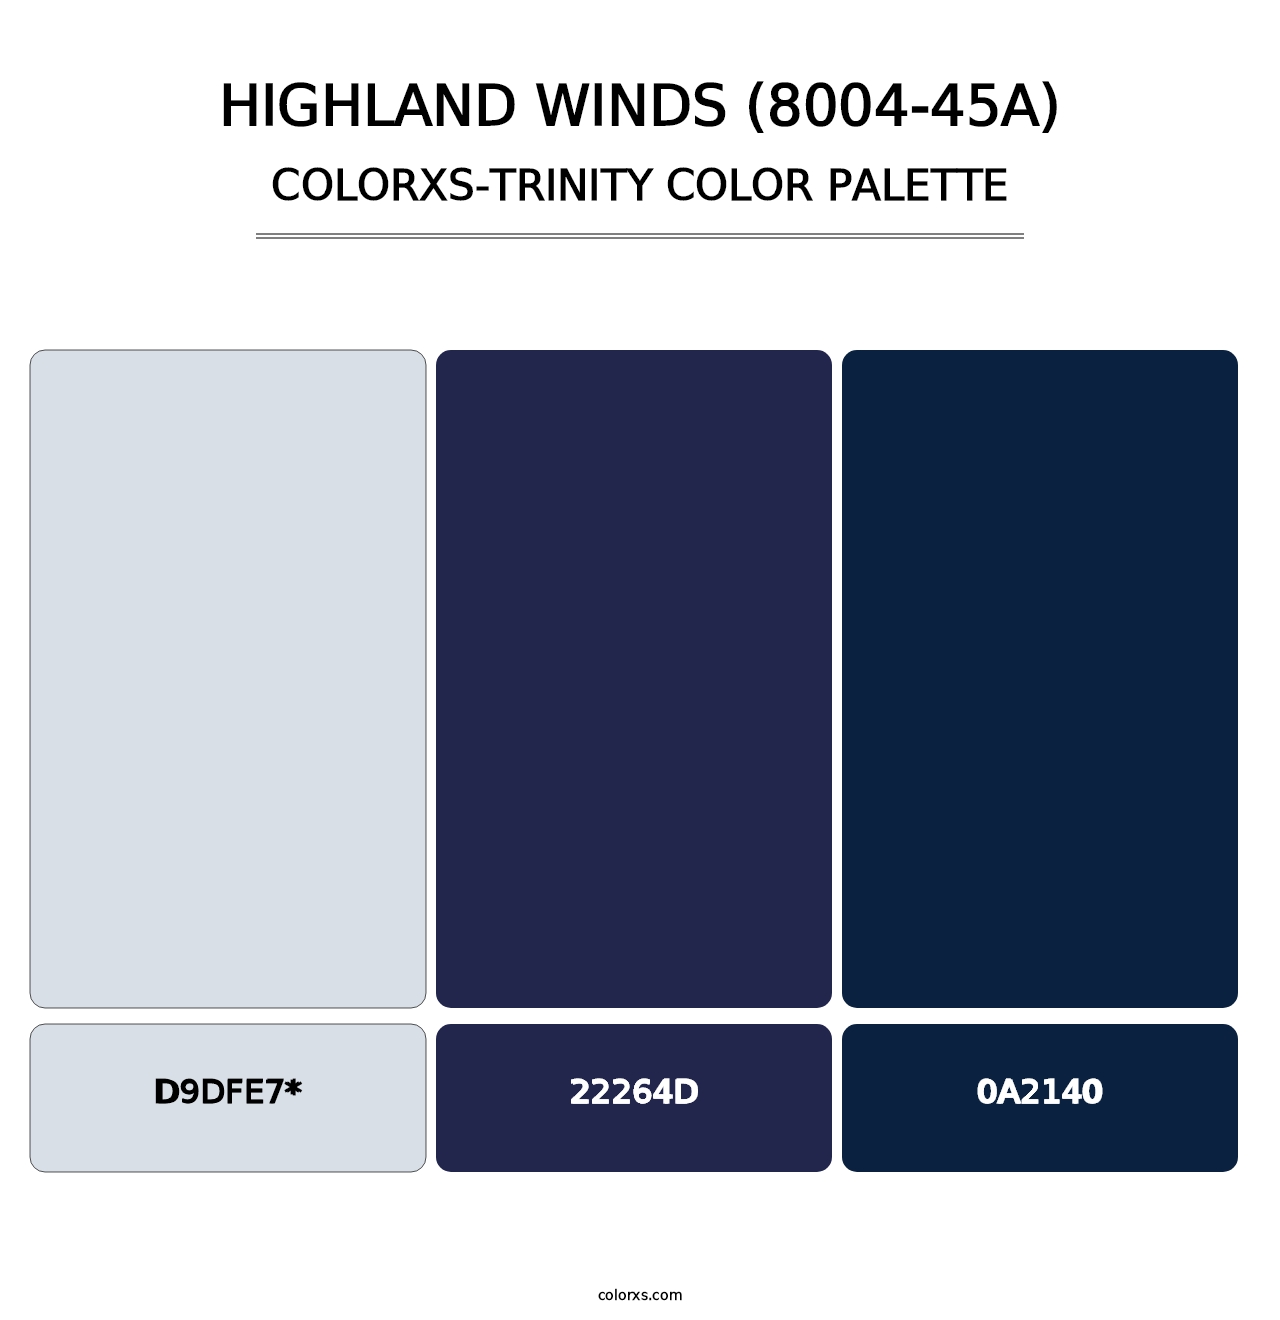 Highland Winds (8004-45A) - Colorxs Trinity Palette